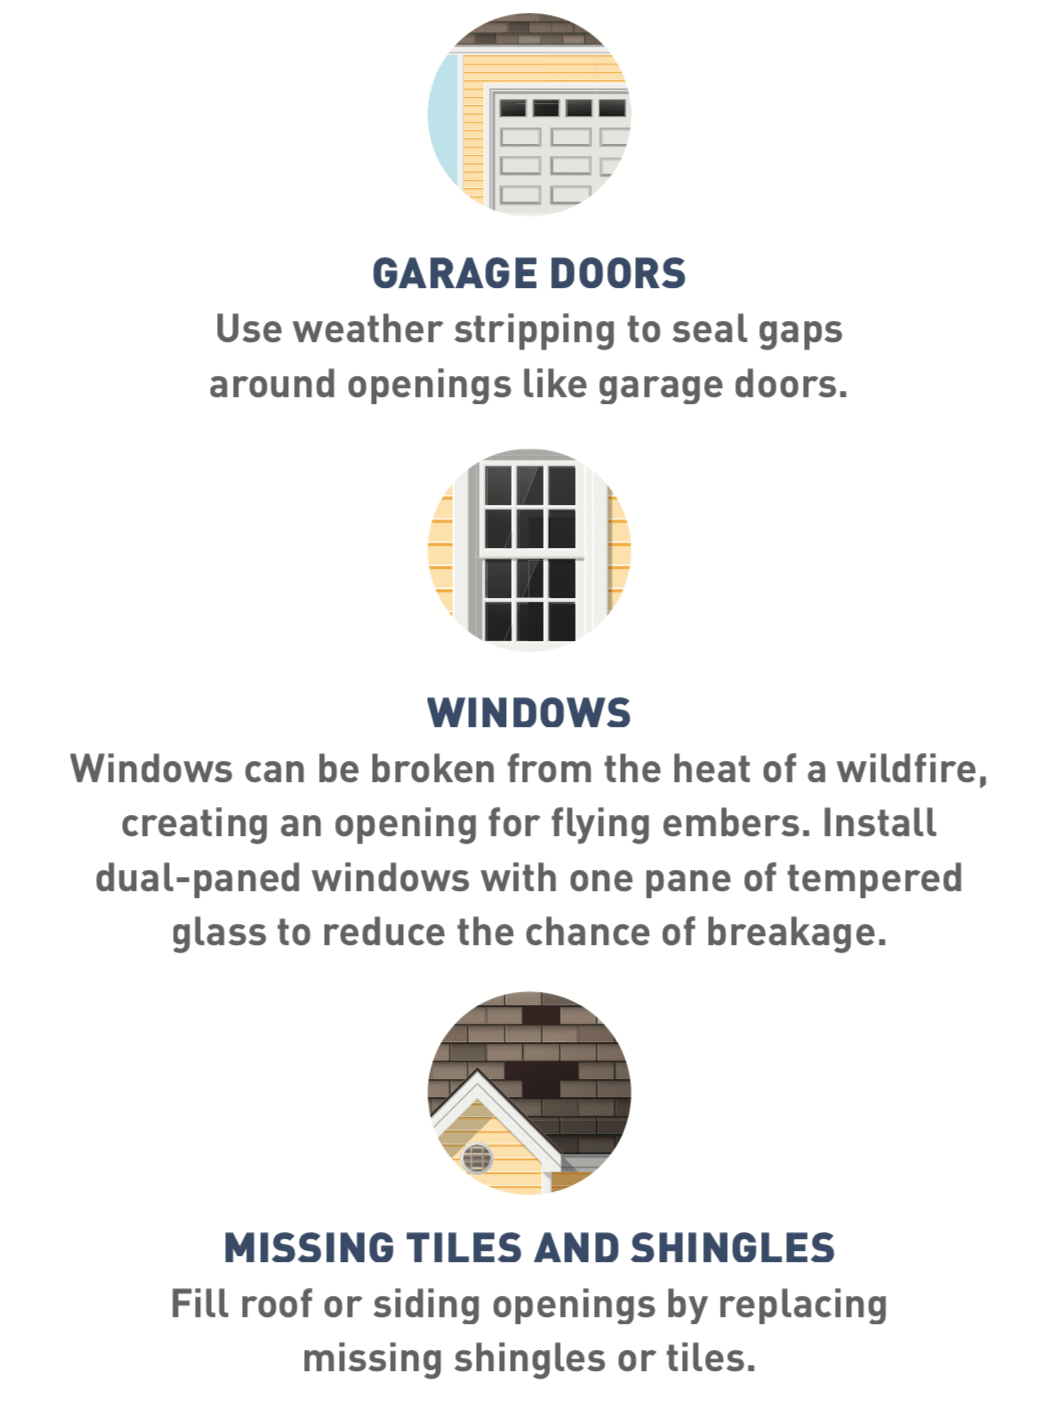 Garage doors—use weather stripping to seal gaps around openings like garage doors.     Windows—windows can be broken from the heat of a wildfire, creating an opening for flying embers. Install dual-paned windows with one pane of tempered glass to reduce the chance of breakage.     Missing tiles and shingles—fill roof or siding openings by replacing missing shingles or tiles.